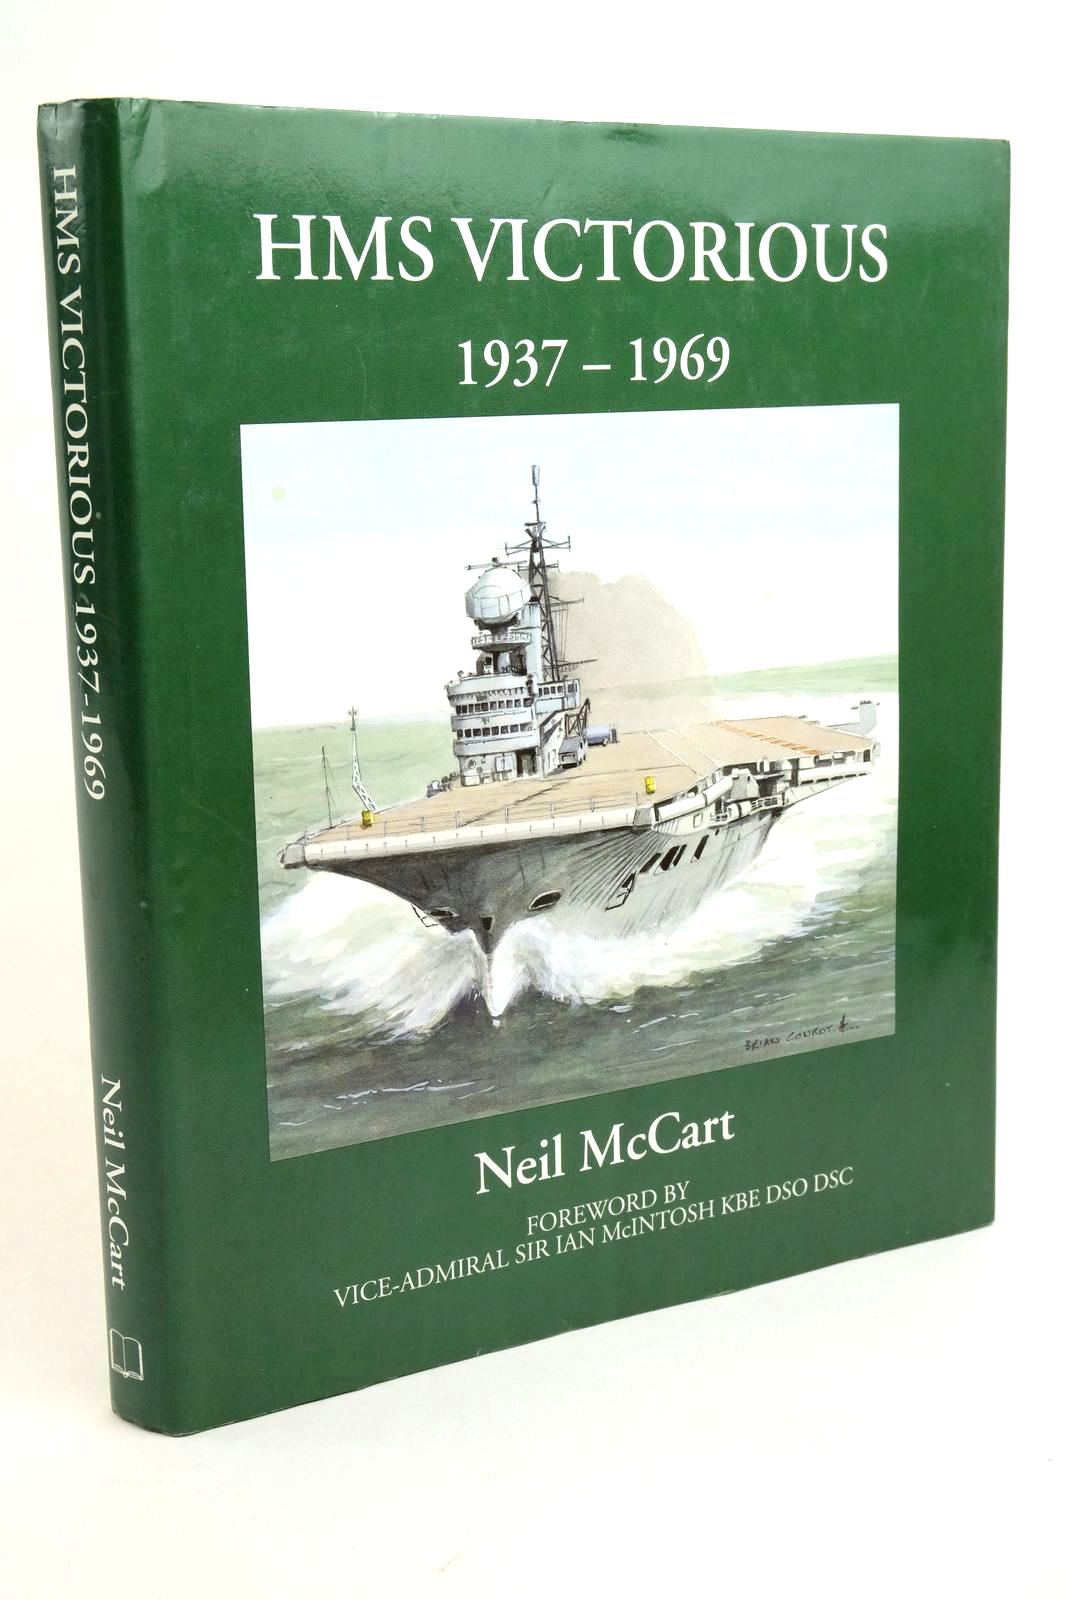 Photo of HMS VICTORIOUS 1937-1969 written by McCart, Neil published by Fan Publications (STOCK CODE: 1322321)  for sale by Stella & Rose's Books